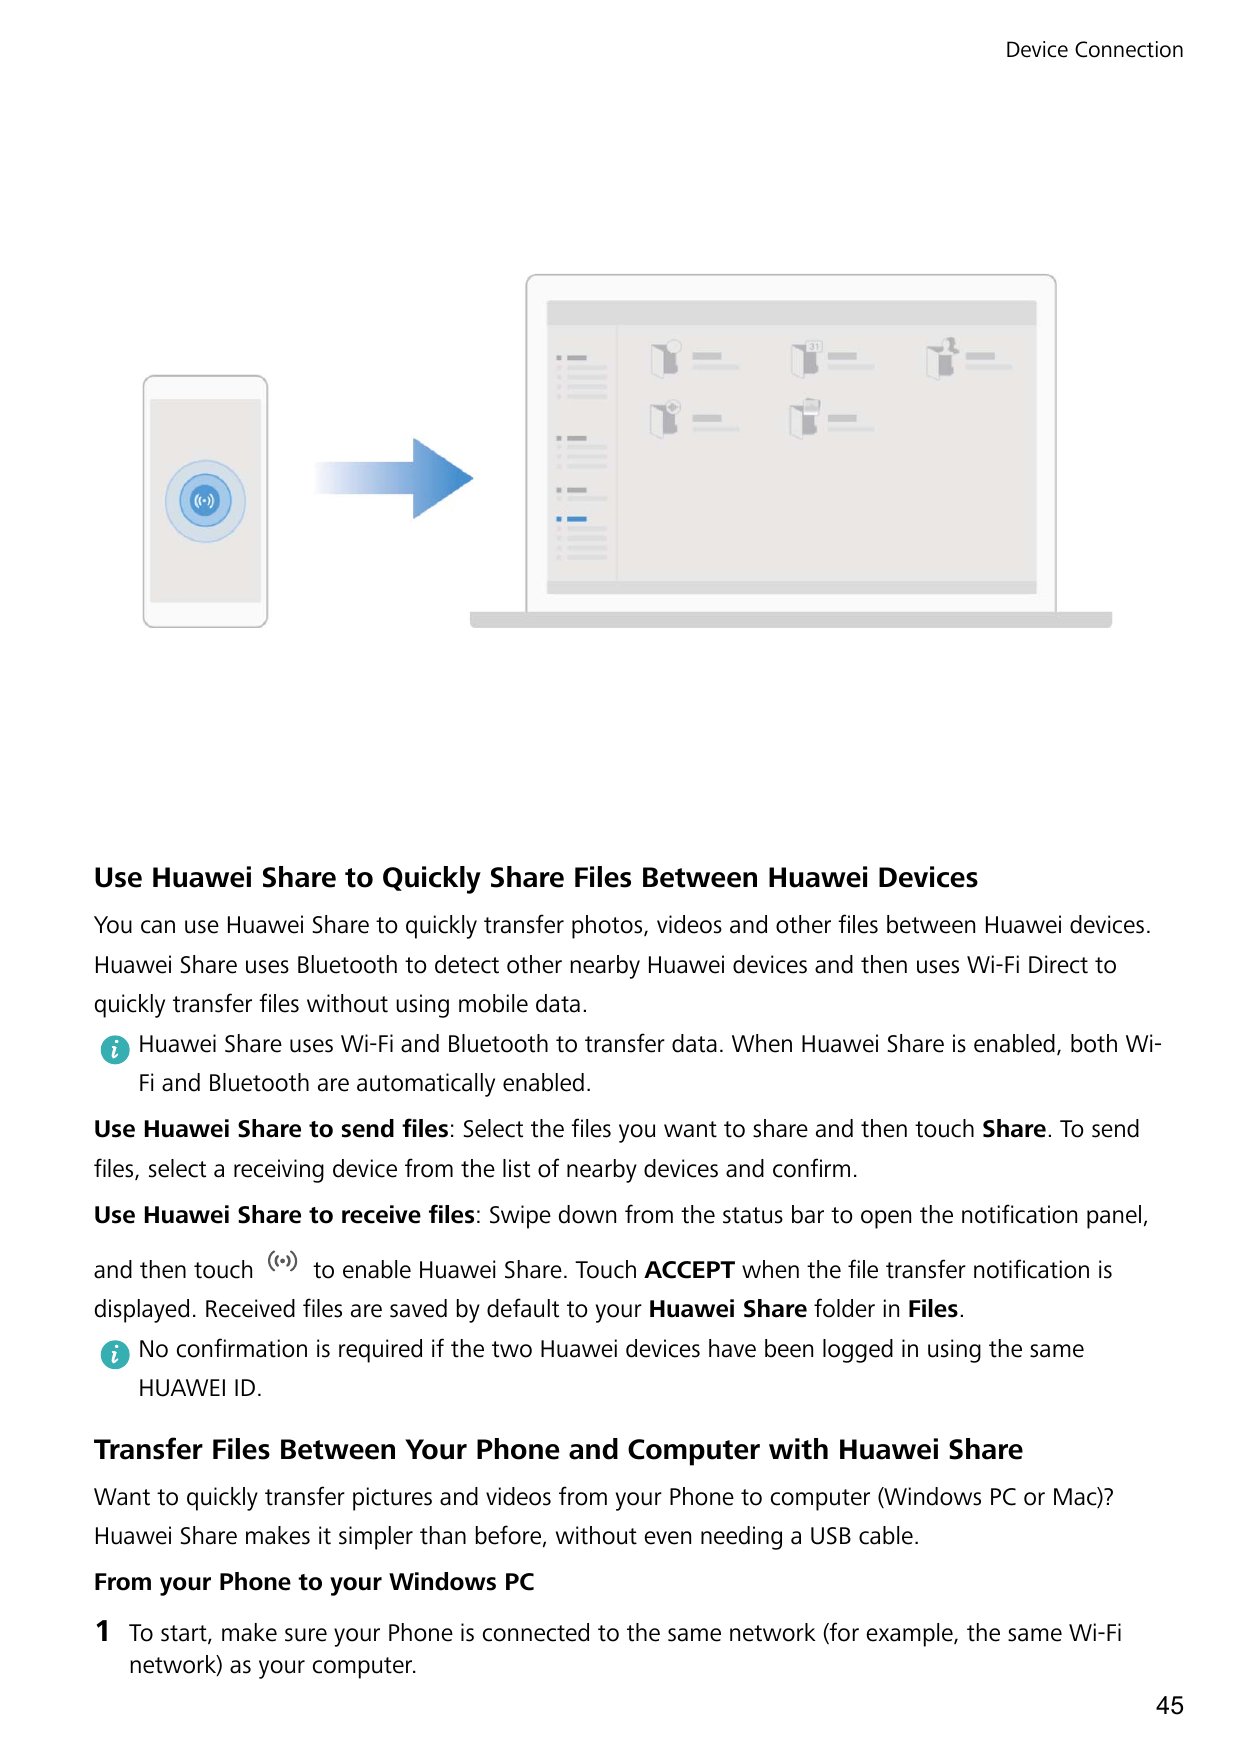 Device ConnectionUse Huawei Share to Quickly Share Files Between Huawei DevicesYou can use Huawei Share to quickly transfer phot